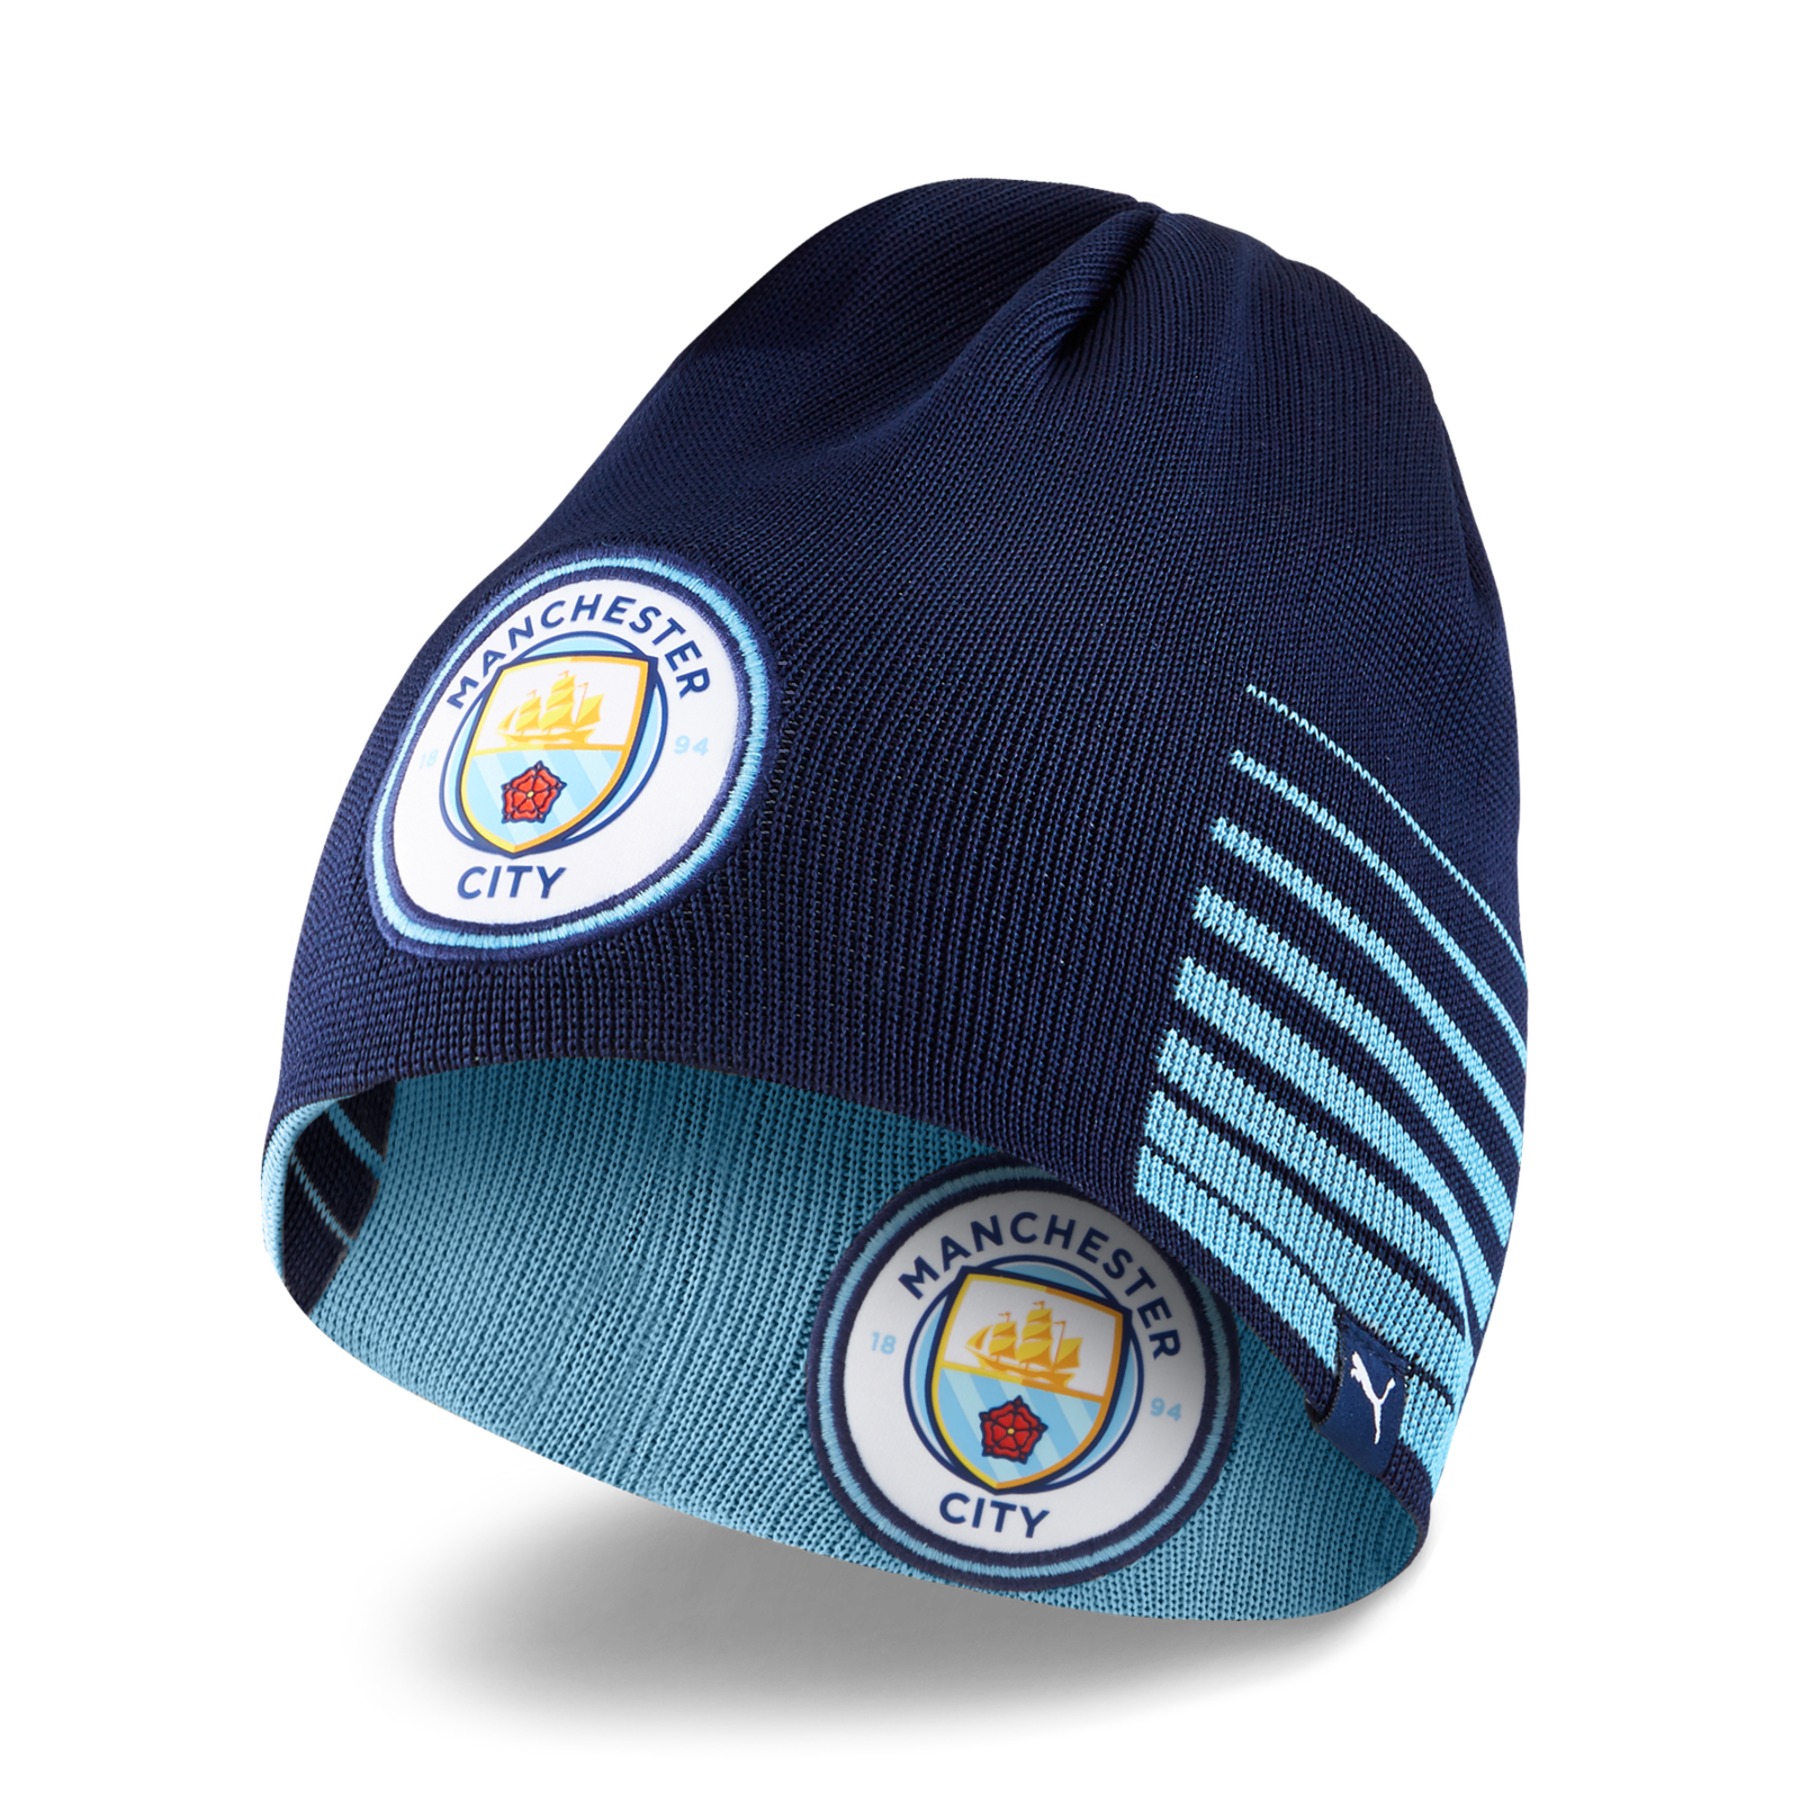 Manchester City Jacket Beanie hat and Bracelets for Mens Adults Winter Soccer New Season Official Licensed Set 3 pcs MC017 